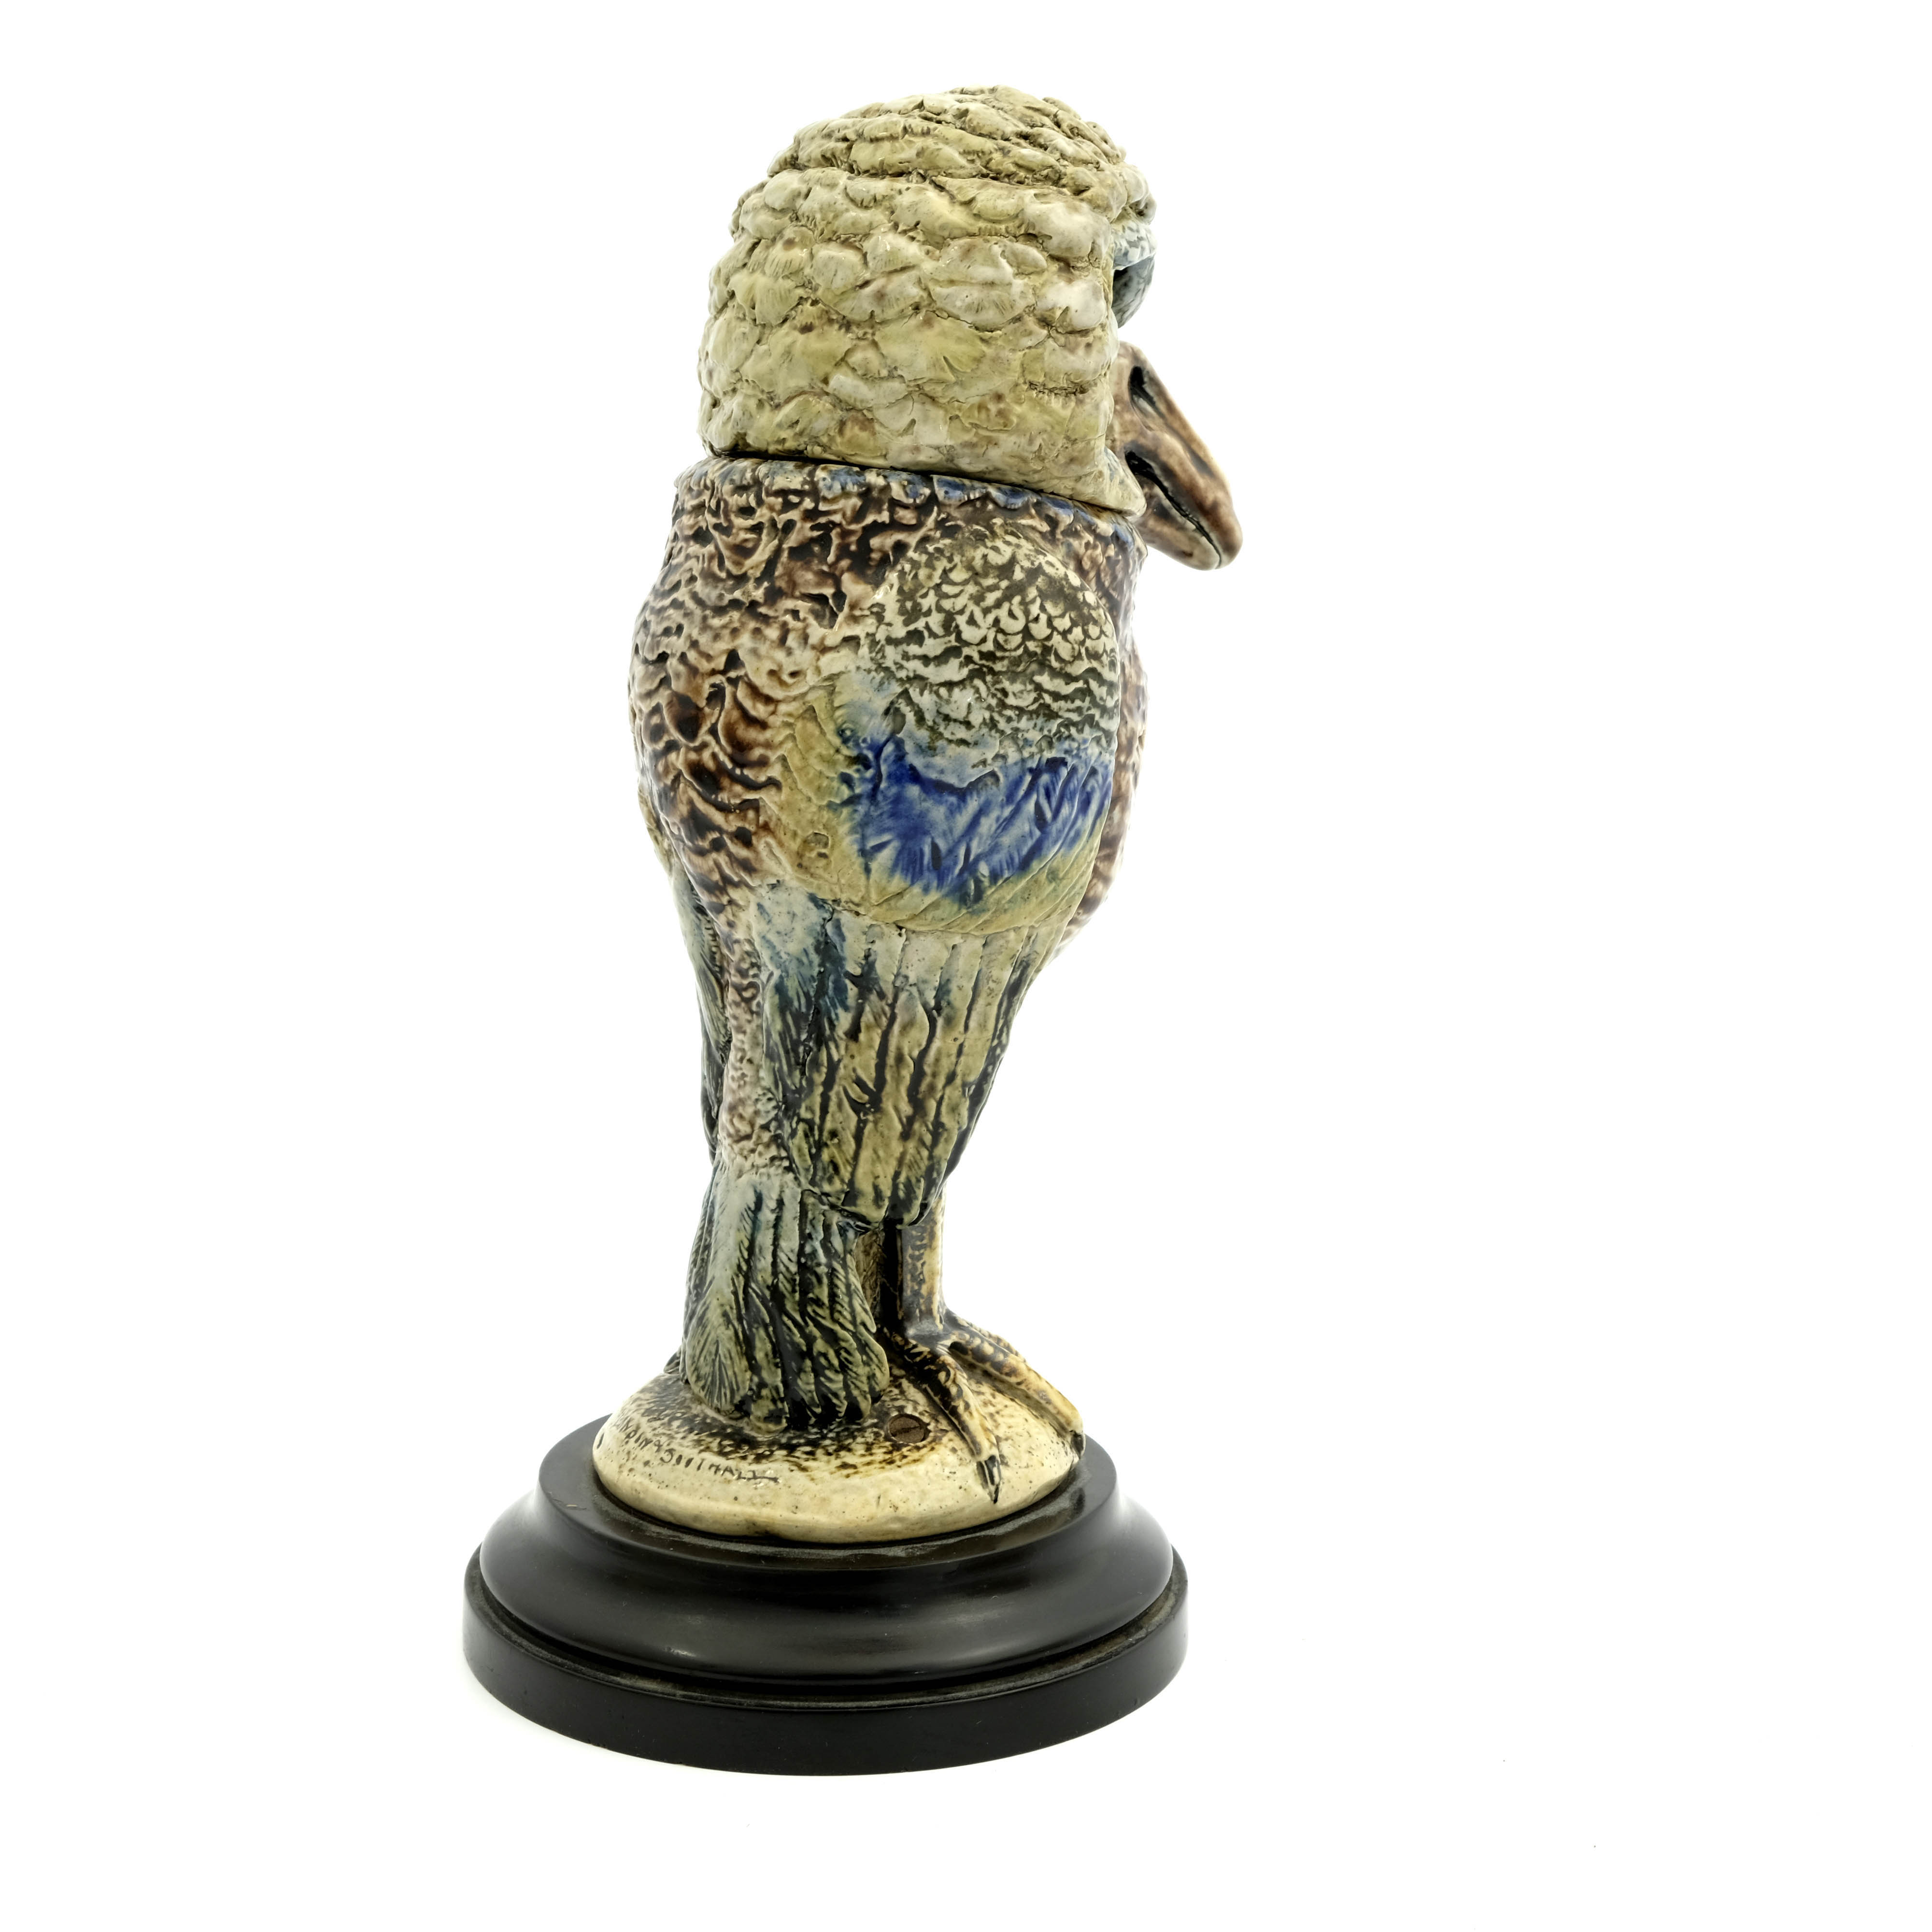 Robert Wallace Martin for Martin Brothers, a characterful Barrister stoneware sculptural jar - Image 6 of 17